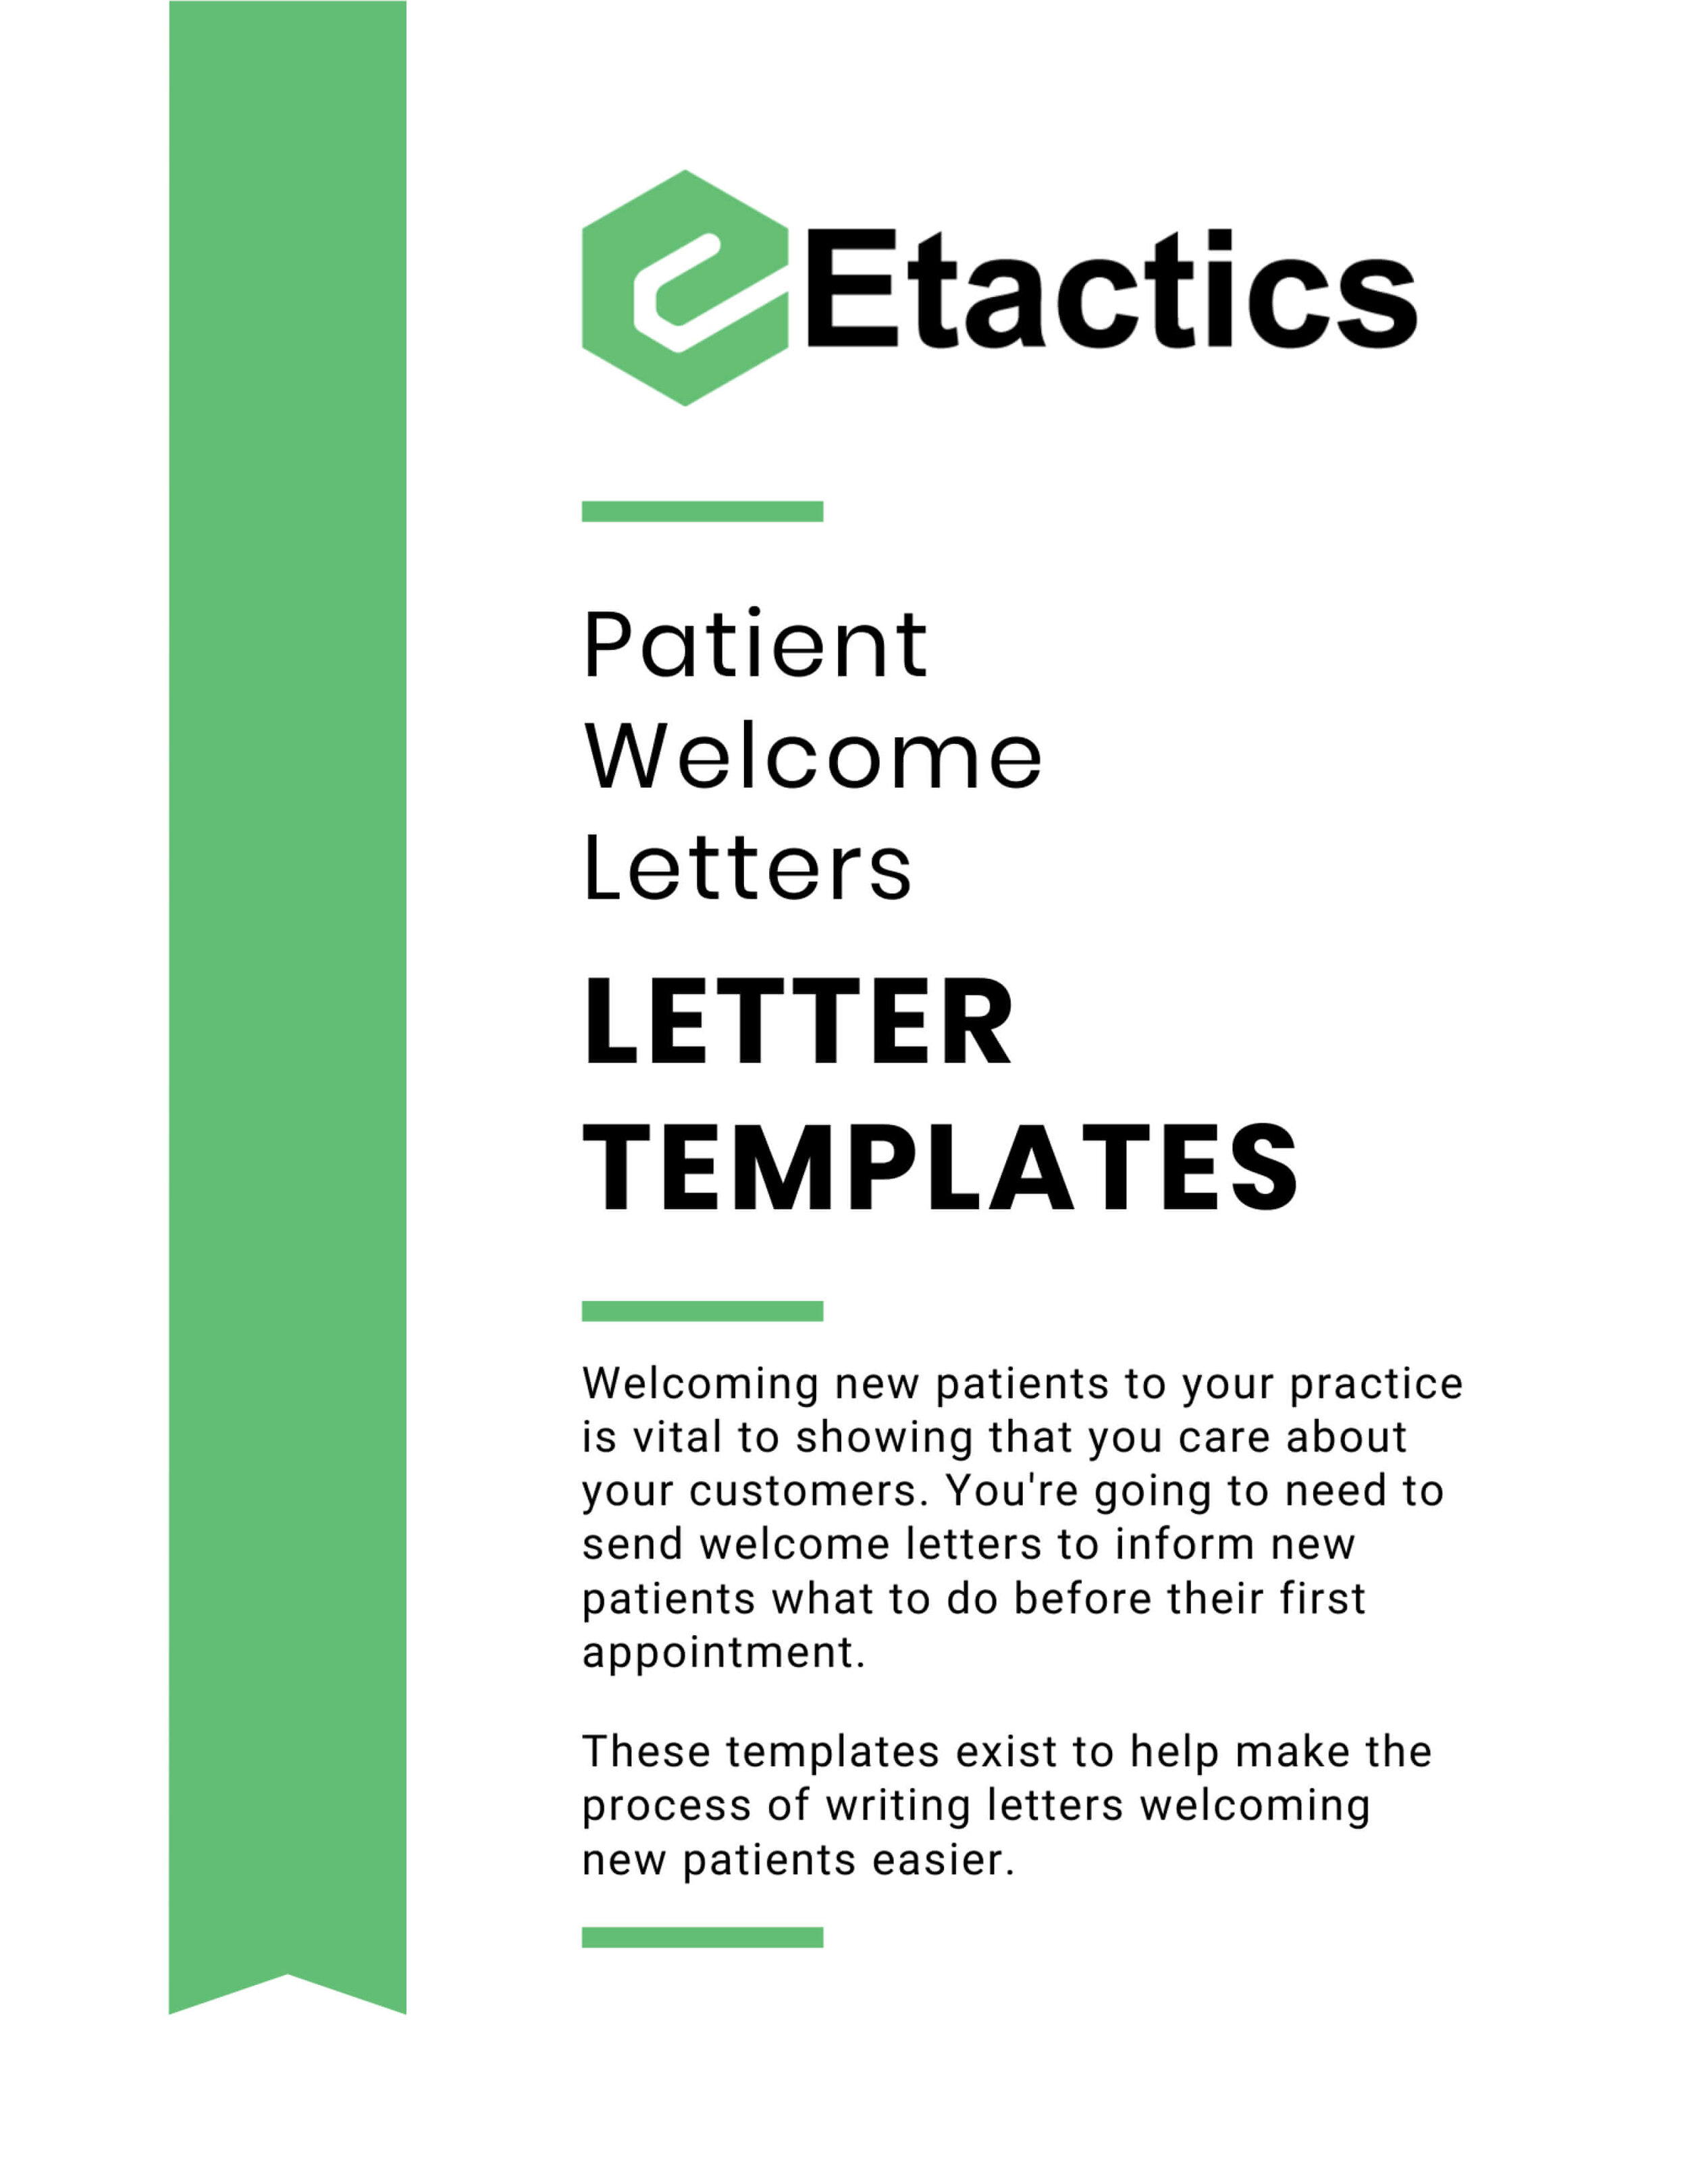 5 New Patient Welcome Letter Templates for Chiropractors-1.jpg